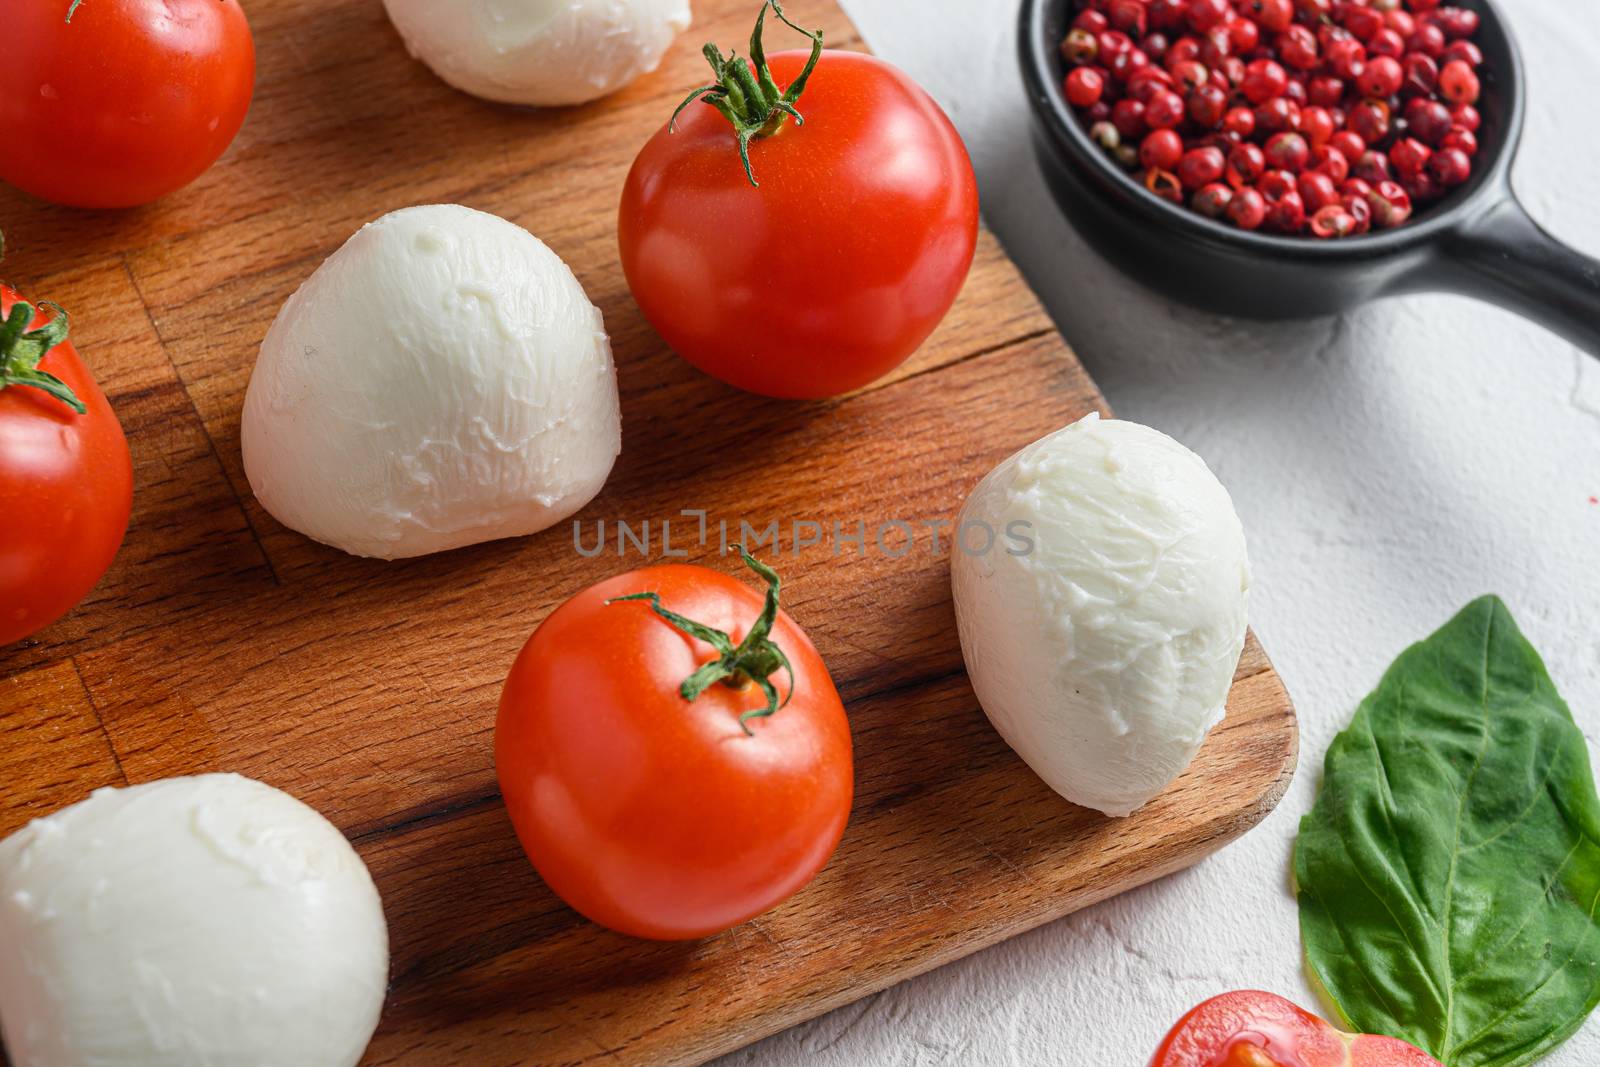 Mini balls of mozzarella cheese, on chop wood board ingredients for salad Caprese. over white background. close up selective focus by Ilianesolenyi